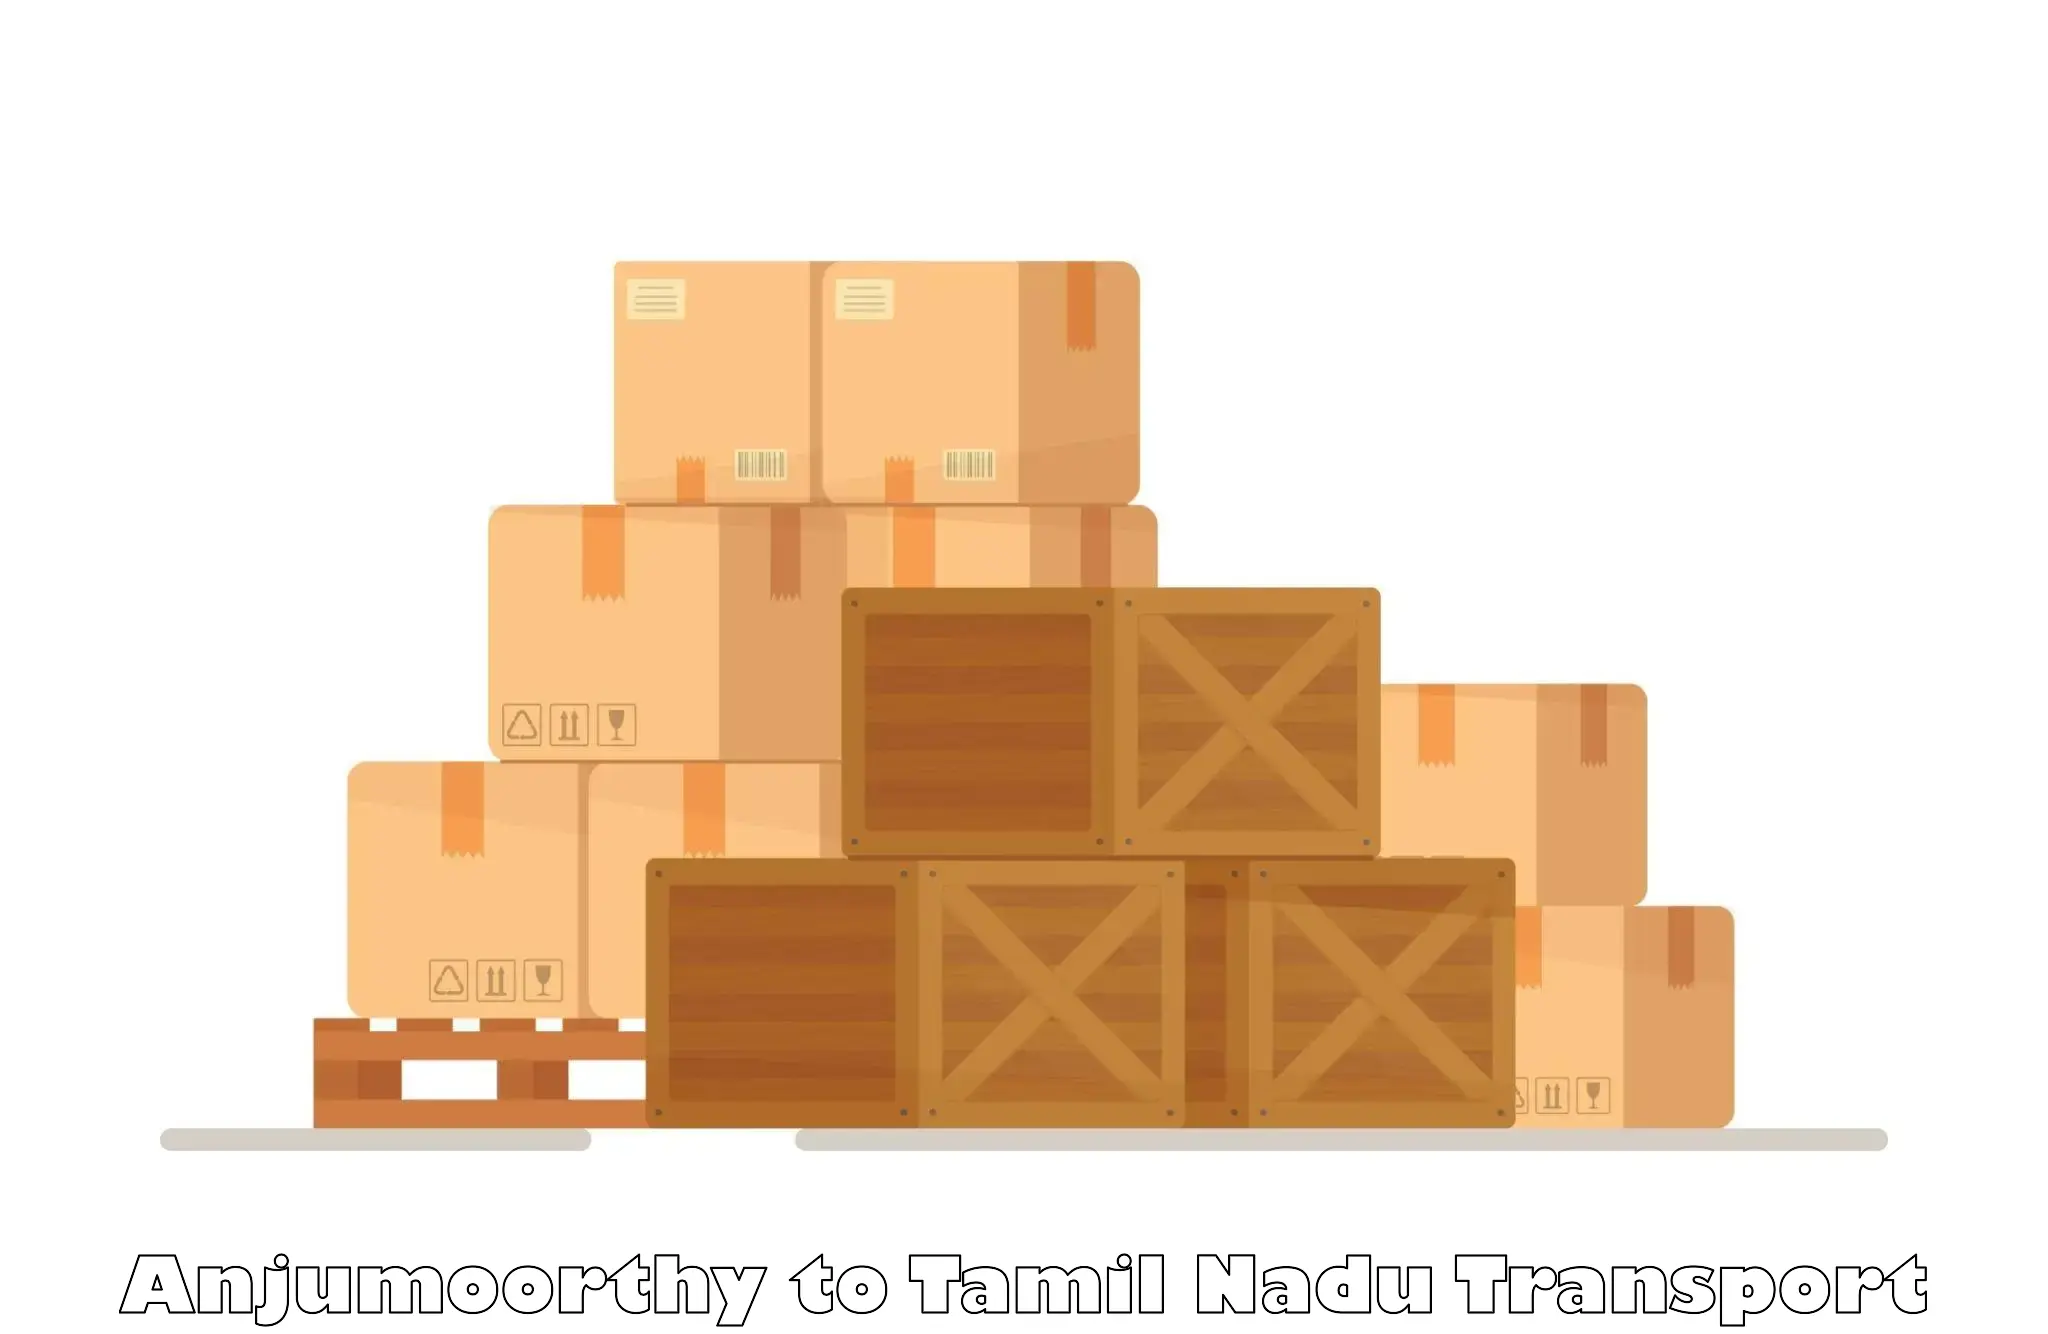 Daily parcel service transport in Anjumoorthy to Thisayanvilai